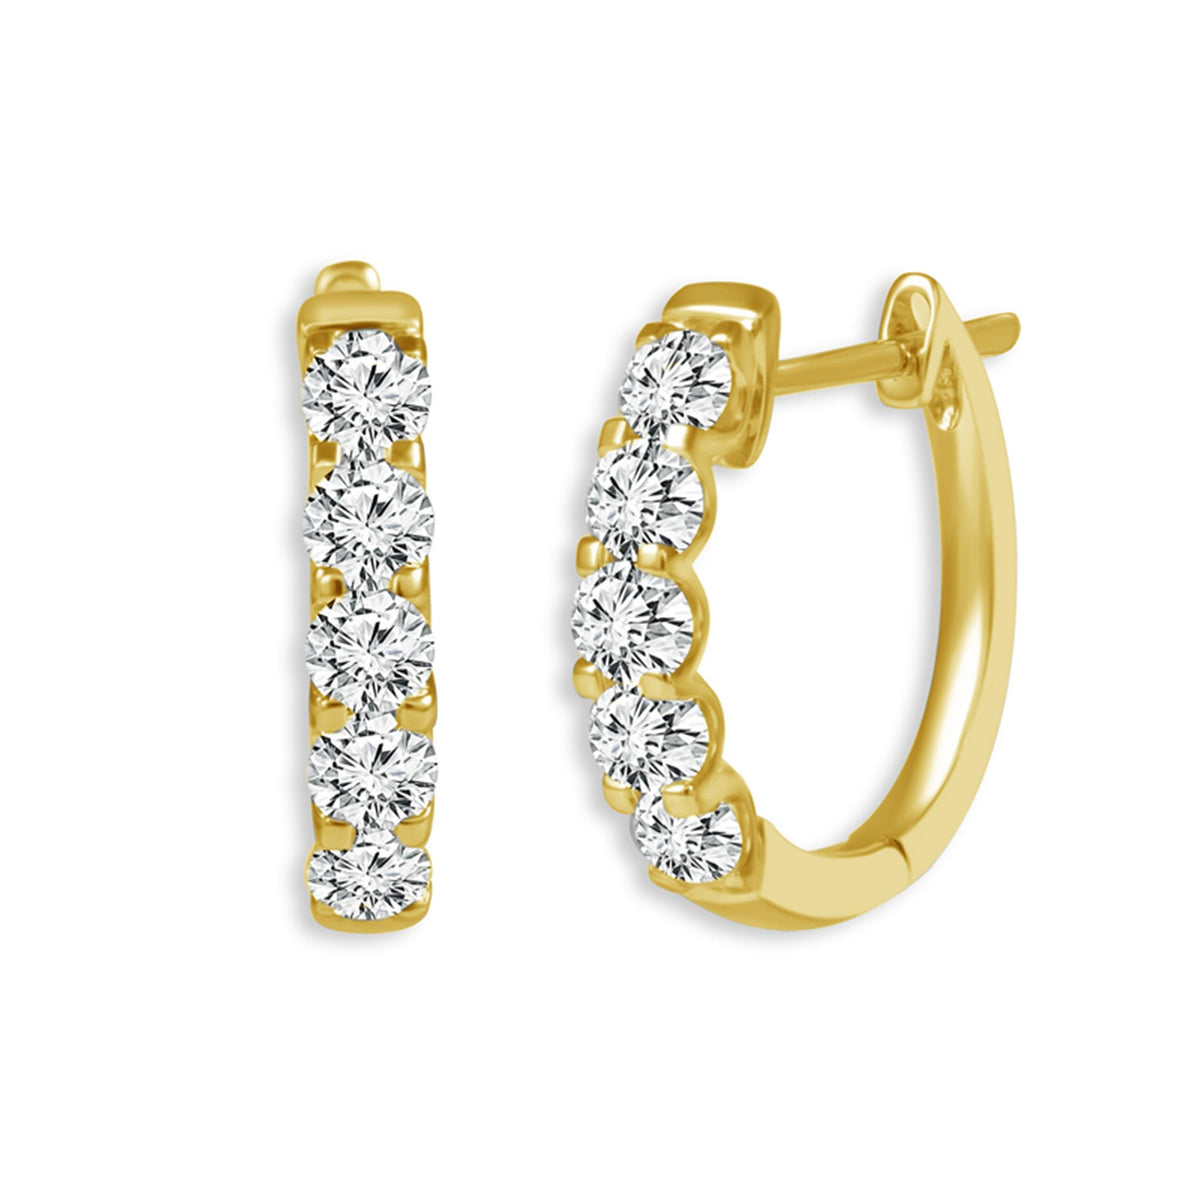 14Kt Yellow Gold Oval Hoop Earrings With 1.50cttw Natural Diamonds